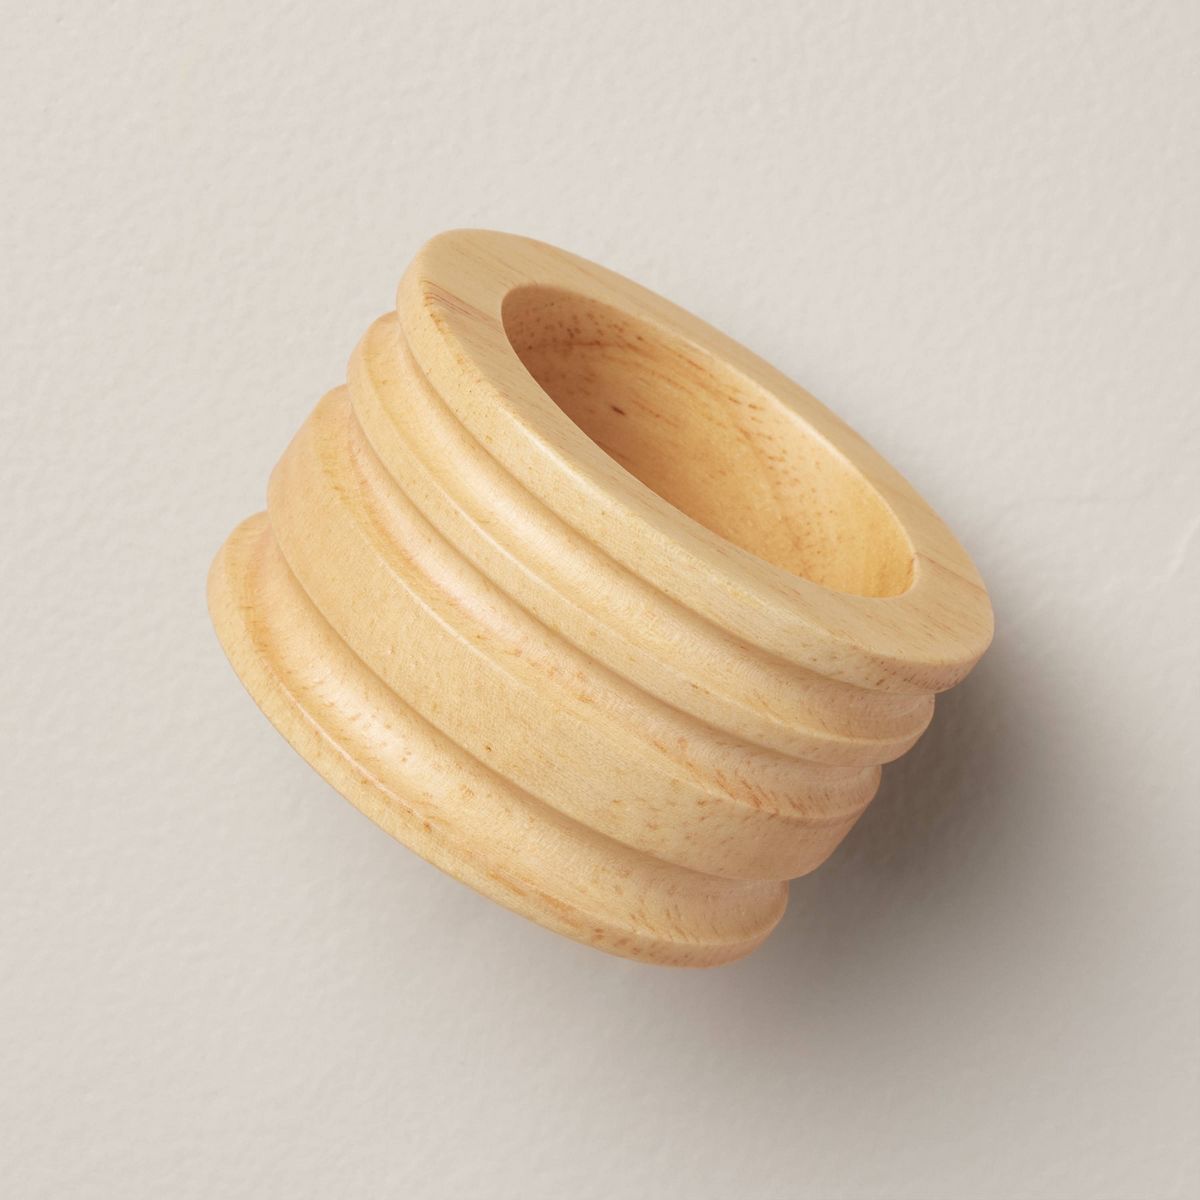 4pc Wooden Napkin Ring Set - Hearth & Hand™ with Magnolia | Target